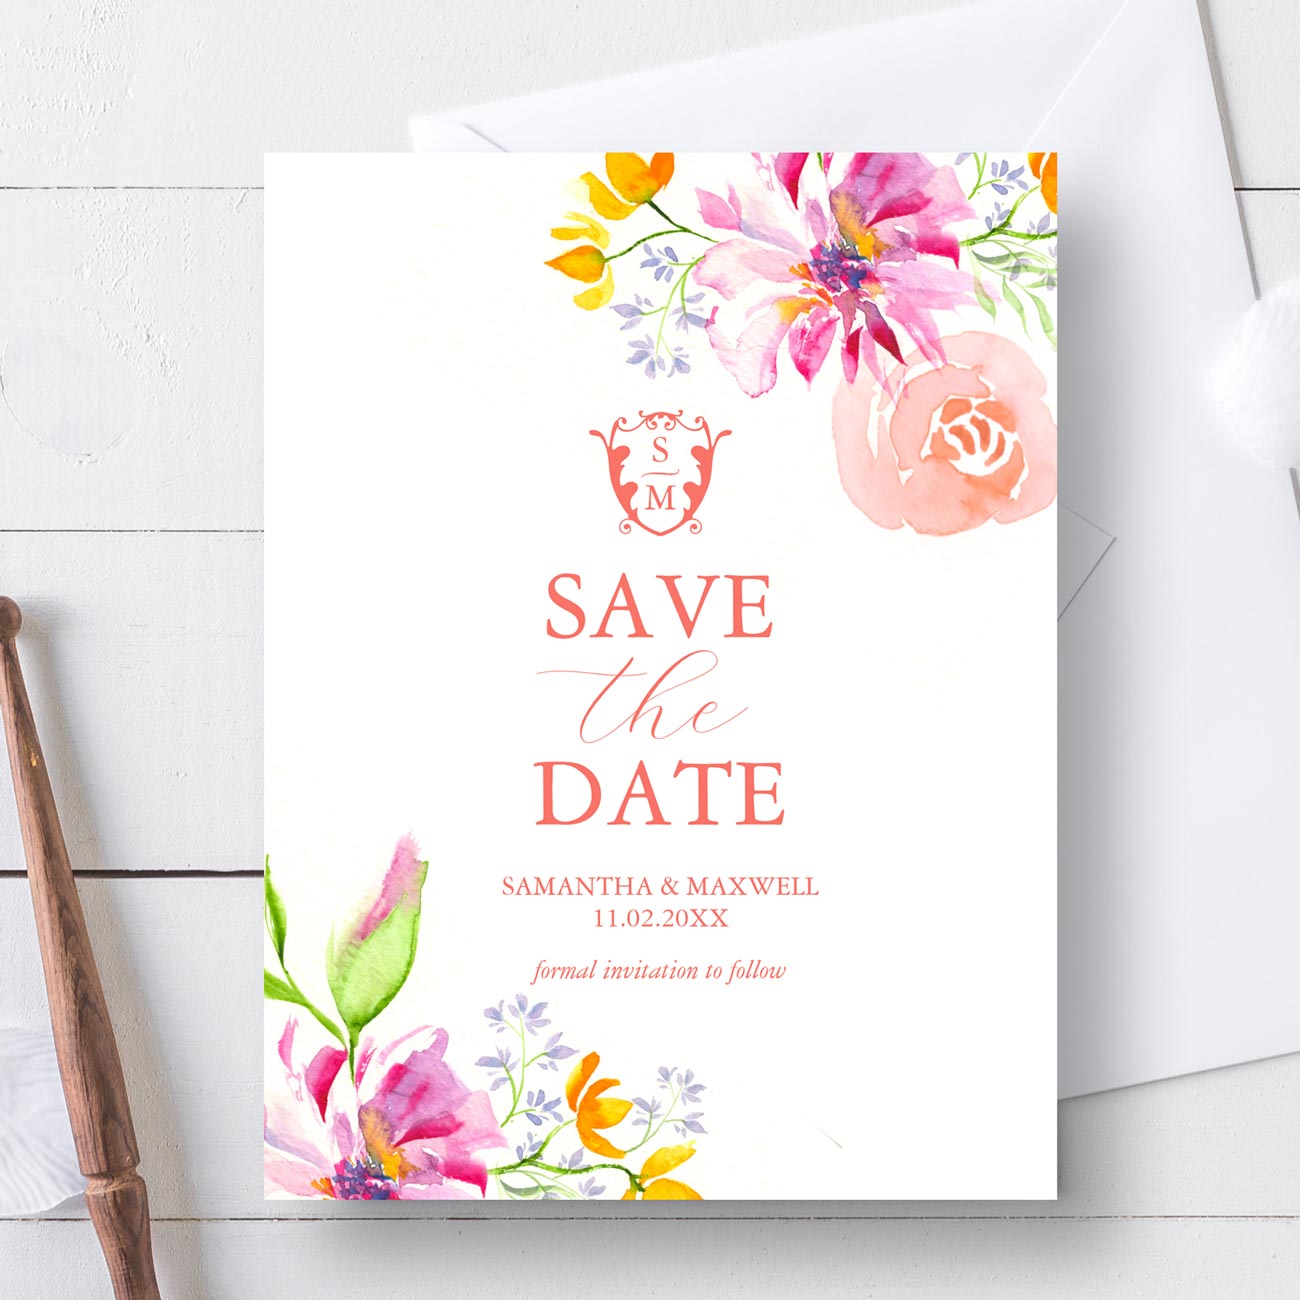 Save the date features beautiful watercolor floral and monogram art by Victoria Grigaliunas of Do Tell A Belle. Click to shop this design.